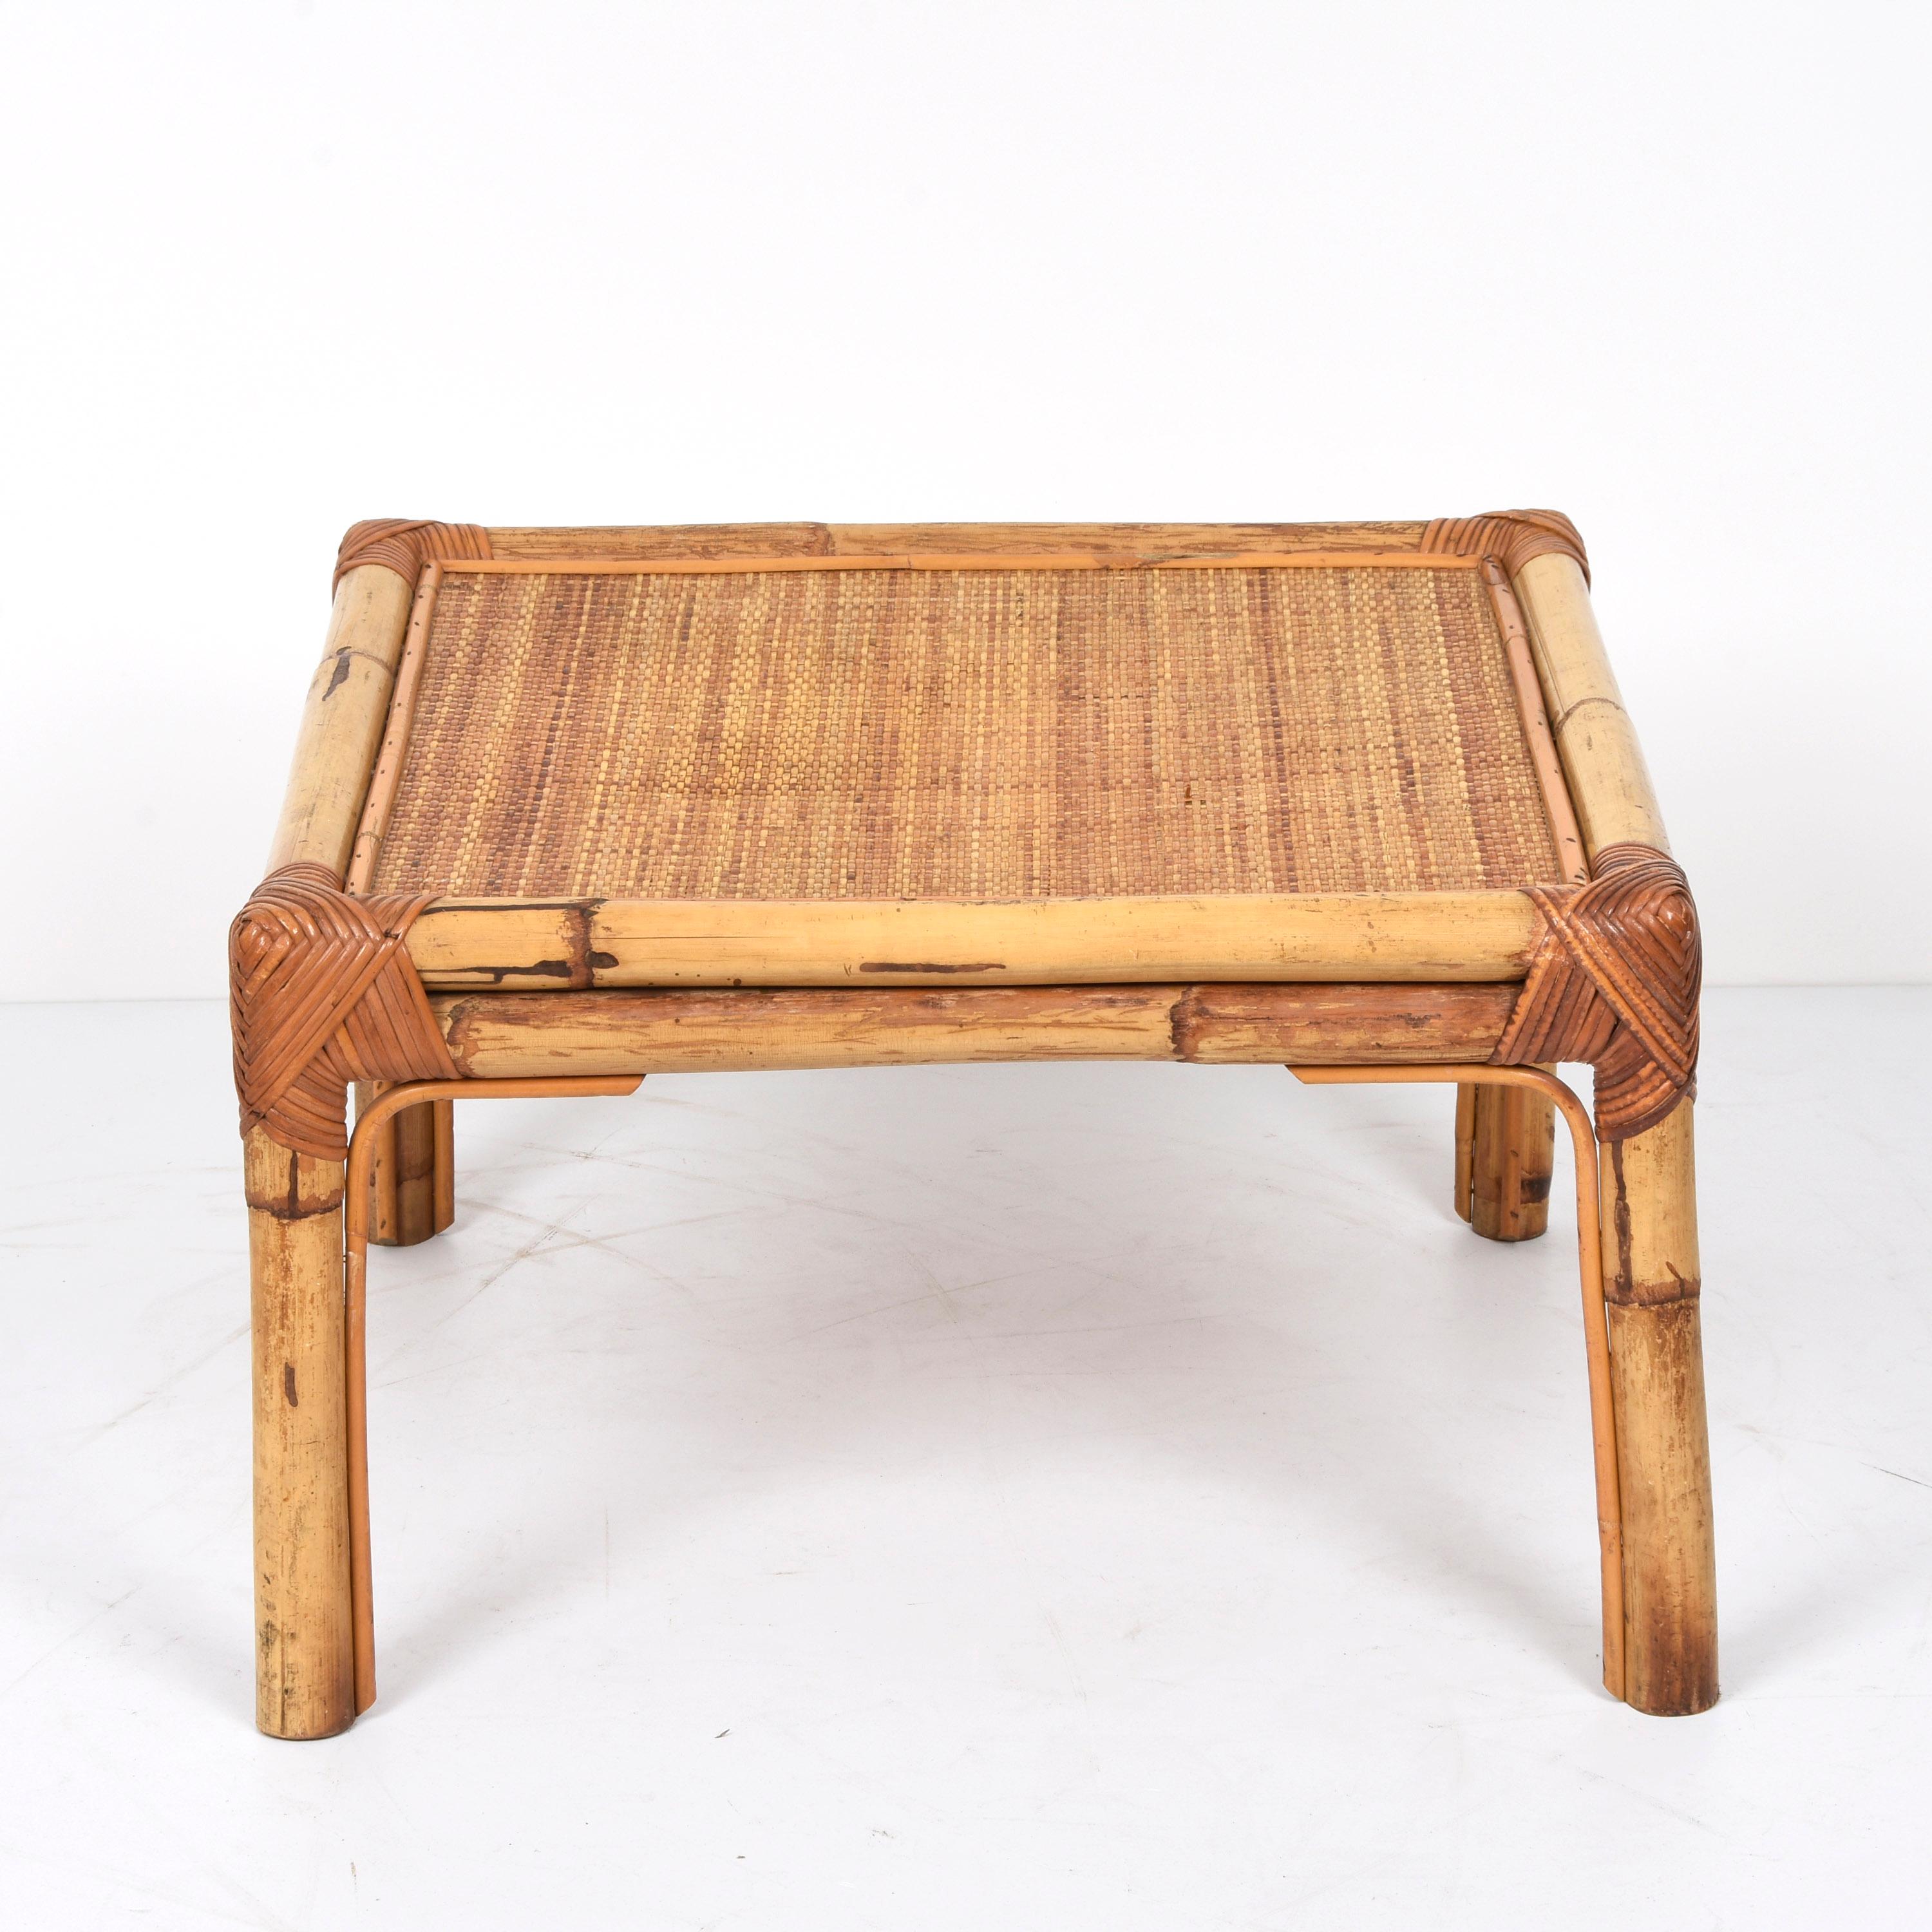 Vivai del Sud Midcentury Italian Squared Bamboo and Rattan Coffee Table, 1970 In Good Condition For Sale In Roma, IT